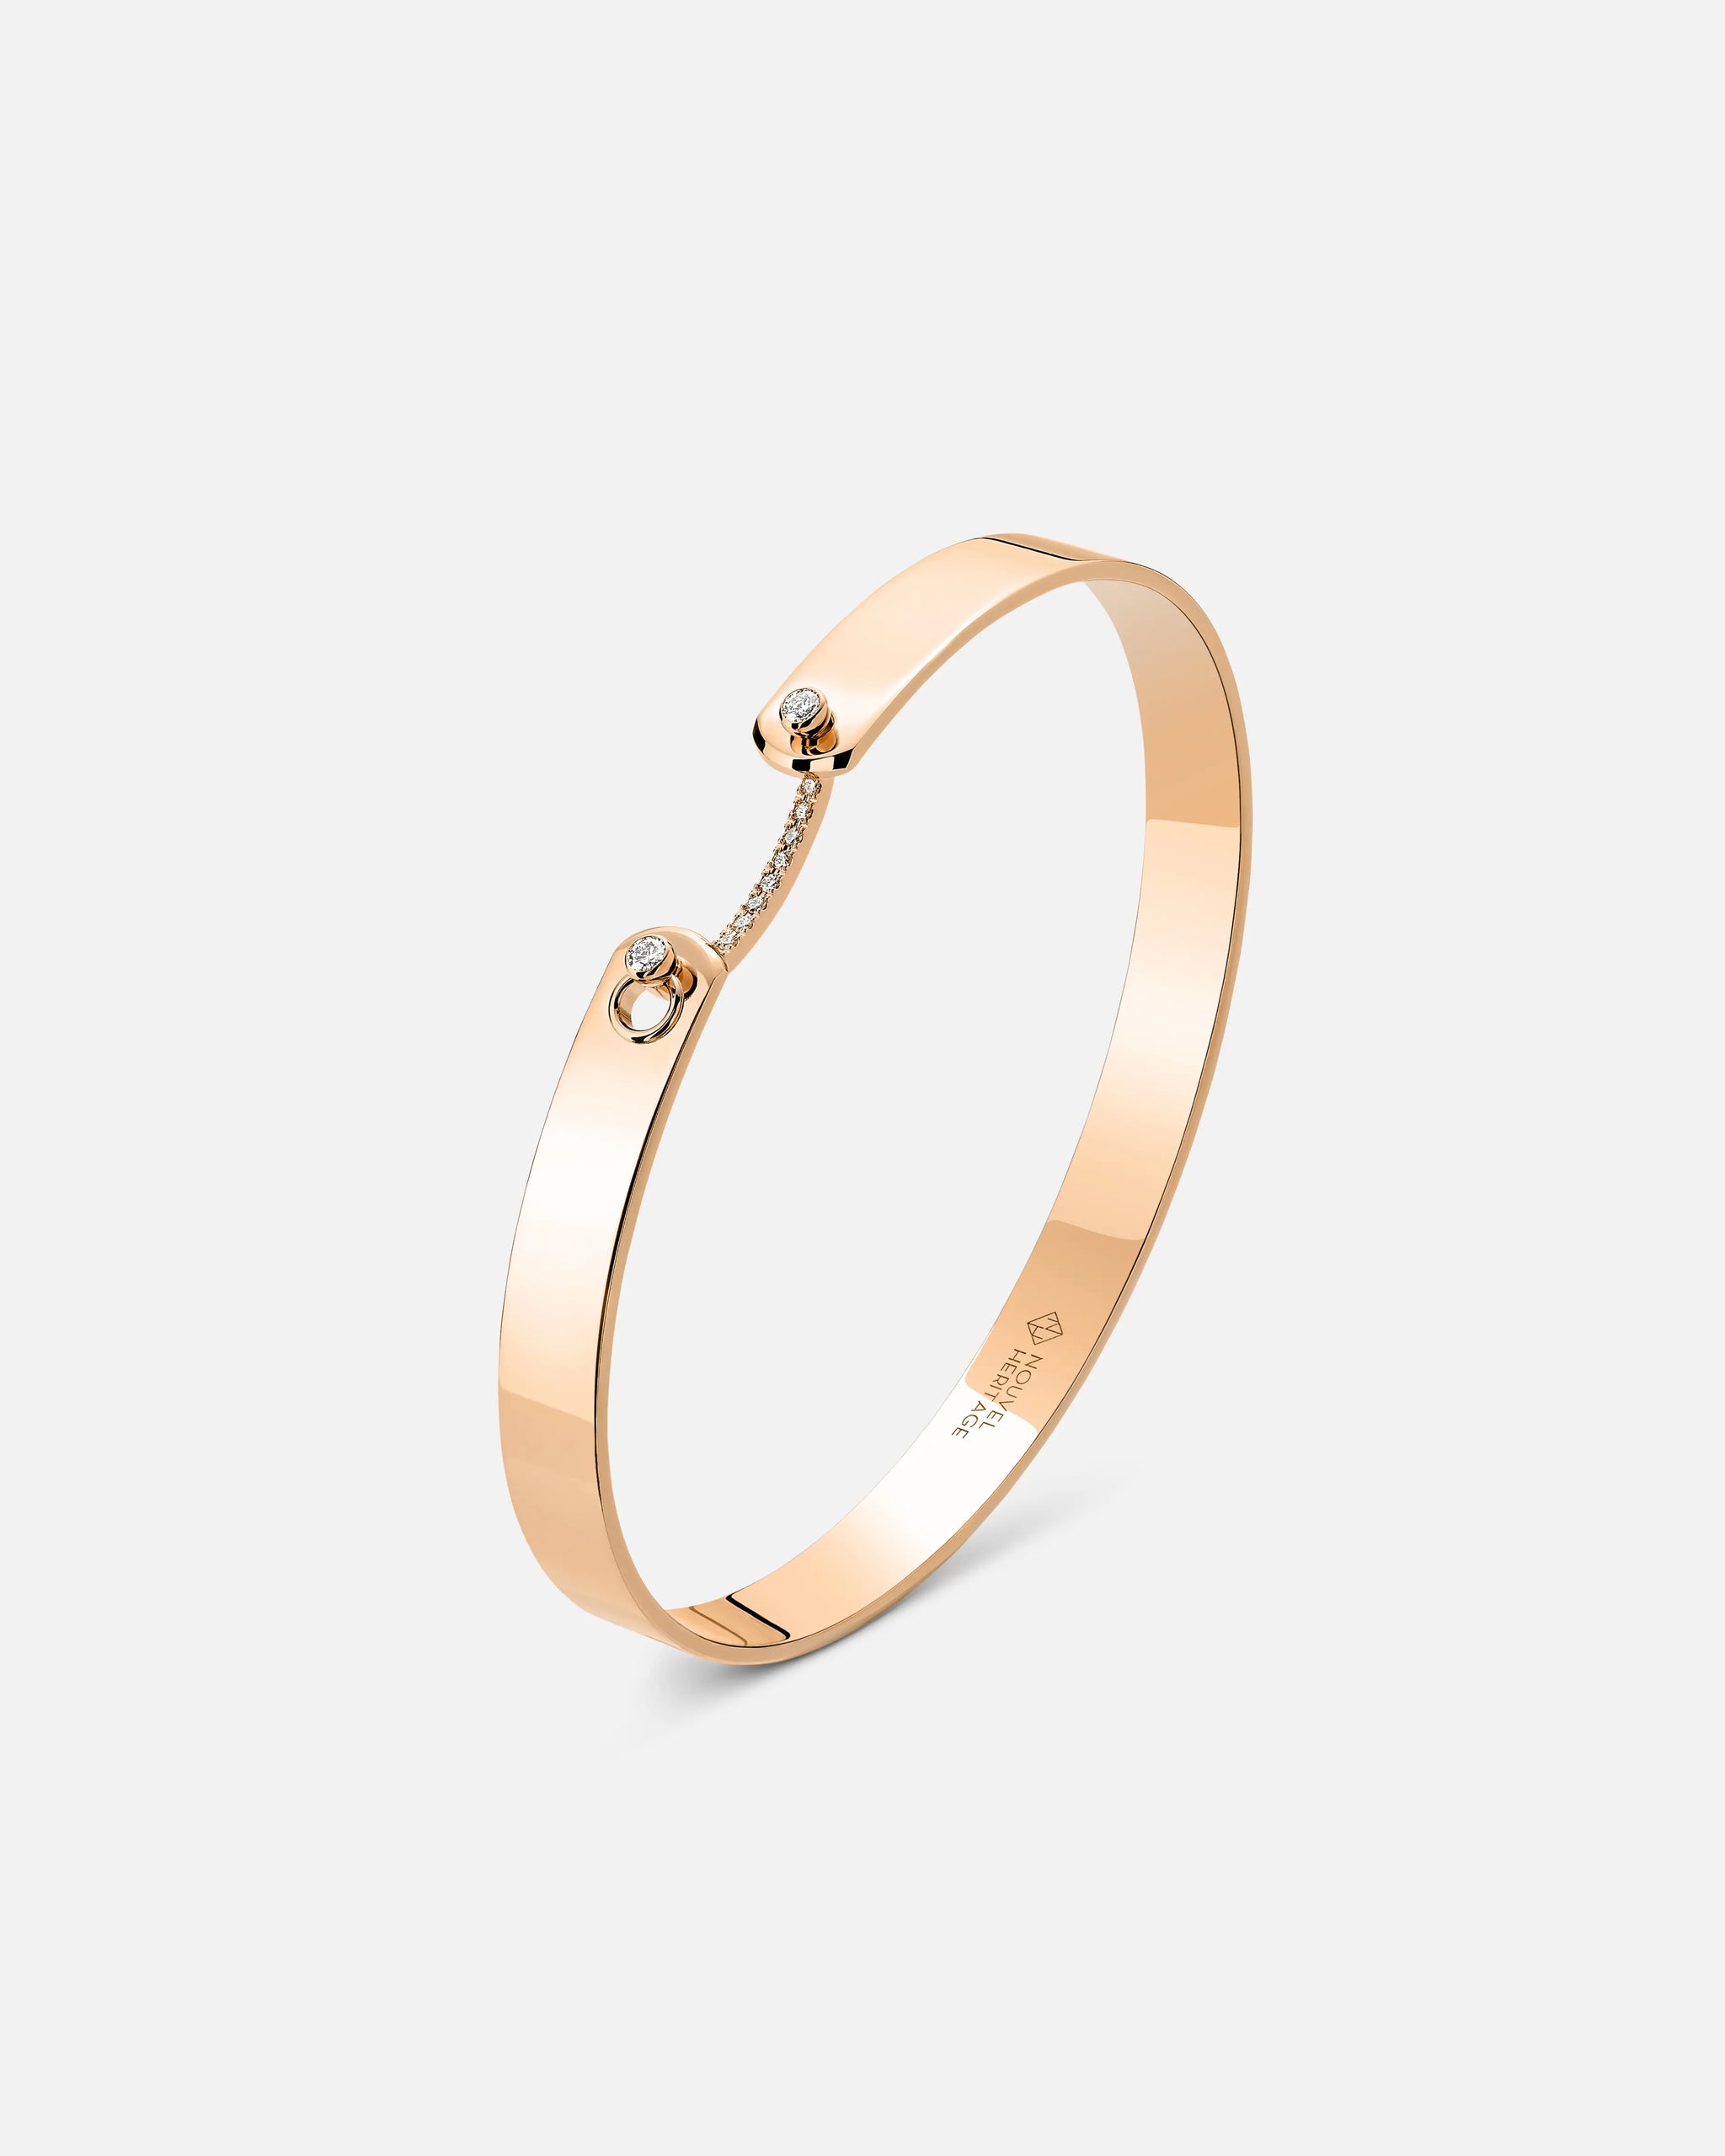 Business Meeting GM Mood Bangle in Rose Gold - 1 - Nouvel Heritage